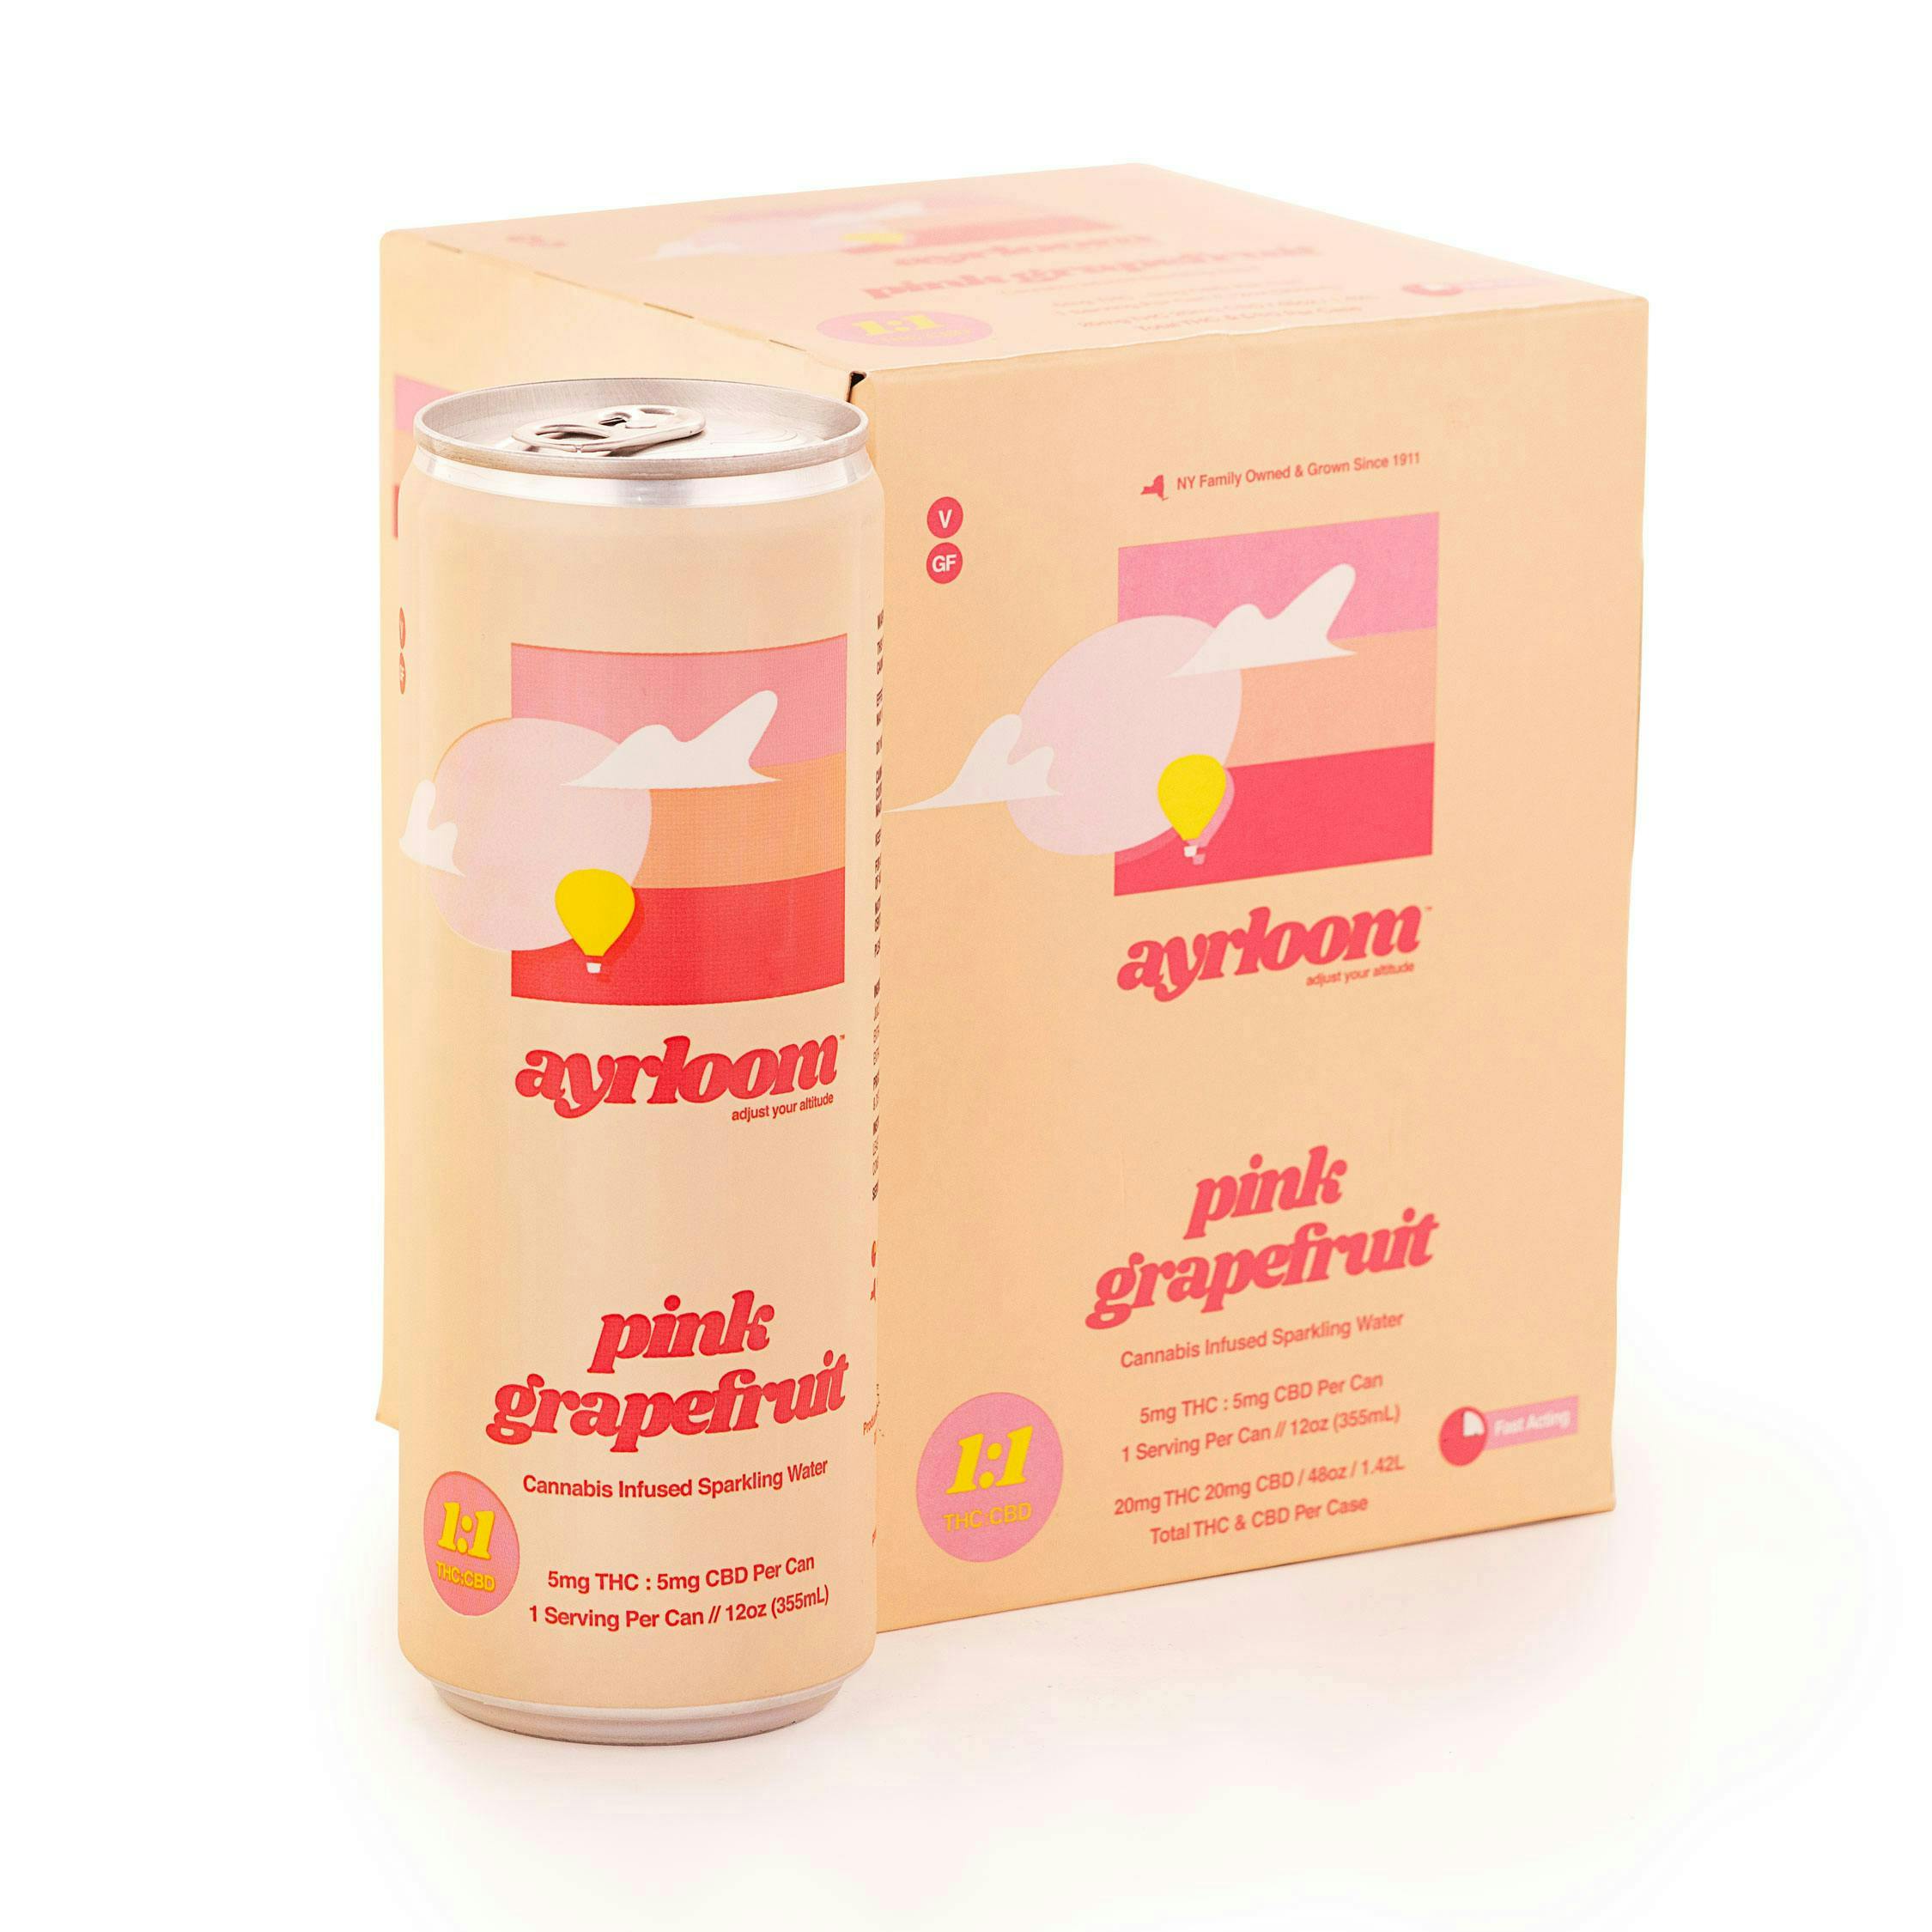 Pink Grapefruit 1:1 Infused Sparkling Water • 4 Pack - ayrloom | Treehouse Cannabis - Weed delivery for New York